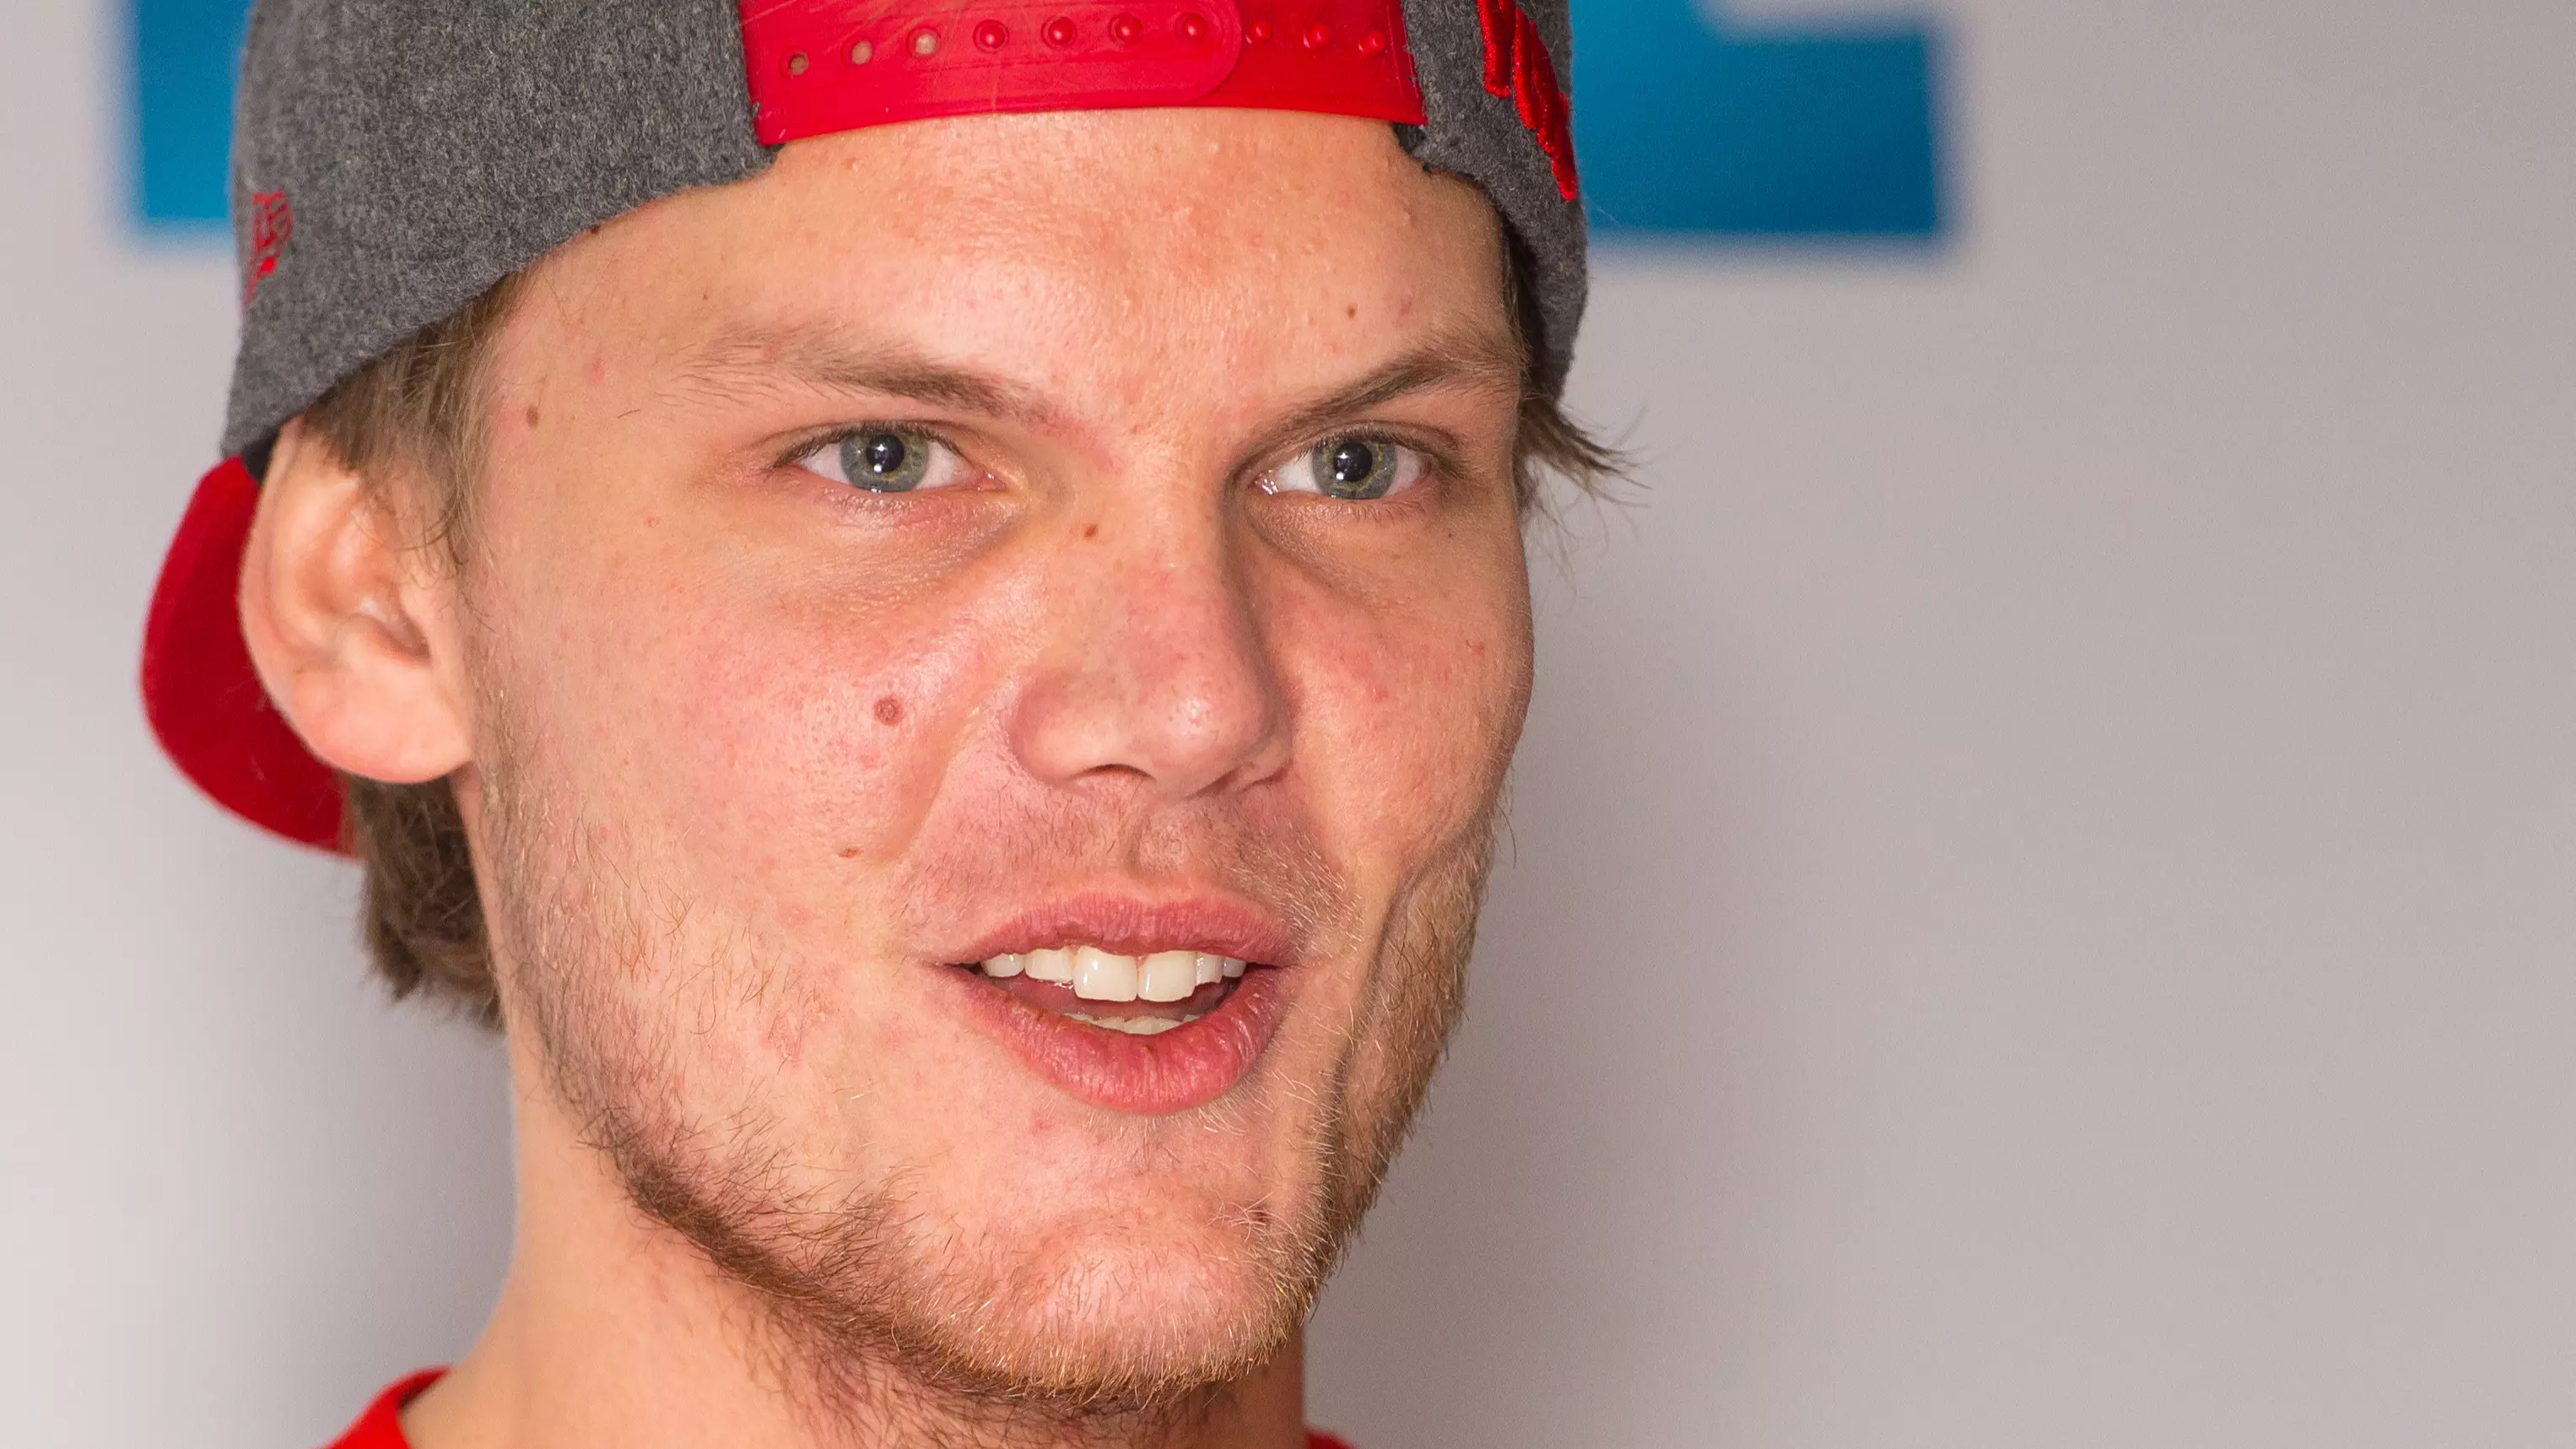 During His Life, Avicii Donated Millions Of Pounds To Charity